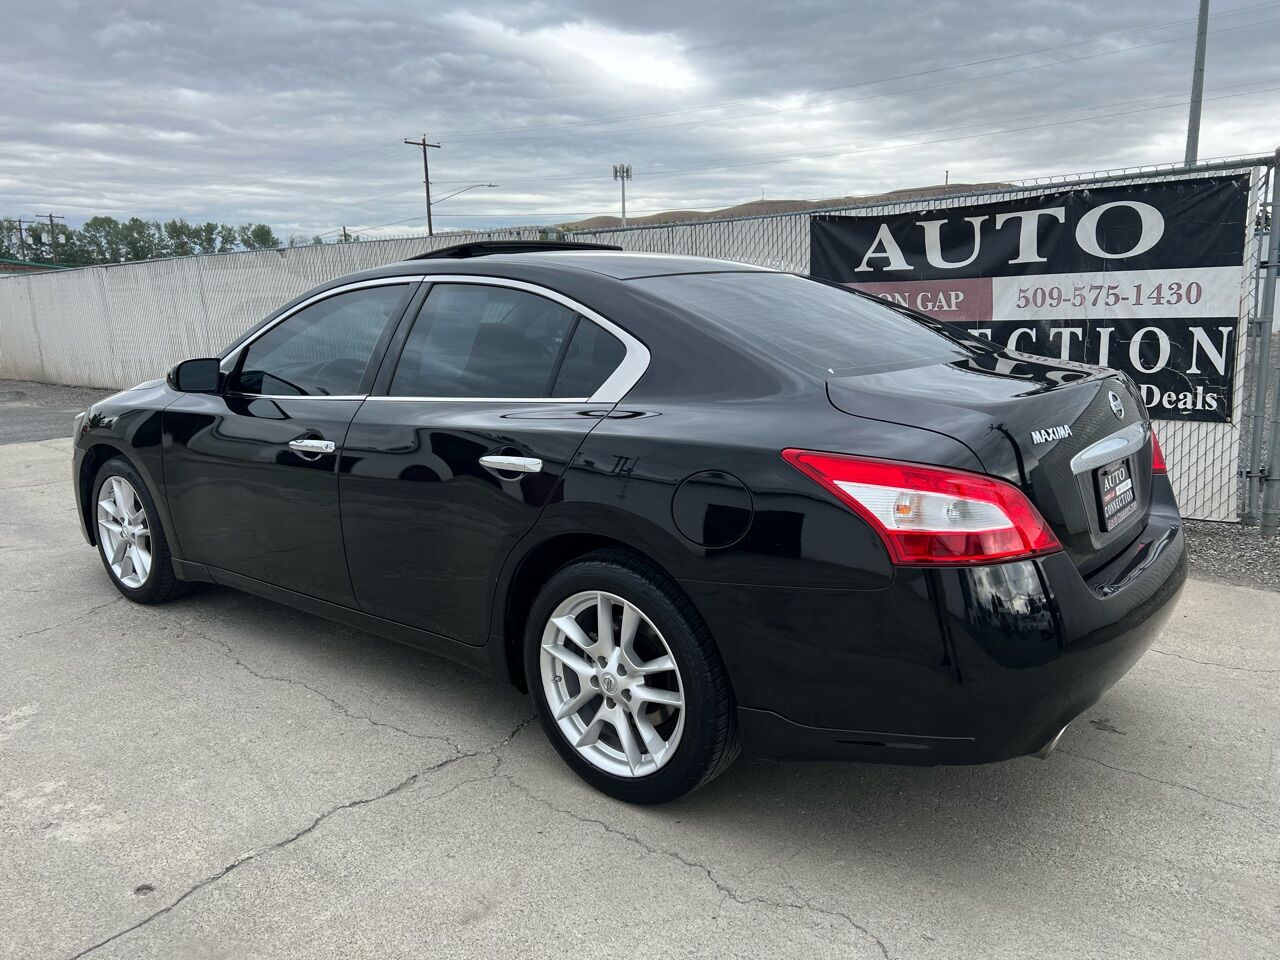 Preowned 2011 NISSAN Maxima 3.5 S 4dr Sedan for sale by Auto Connection in Union Gap, WA